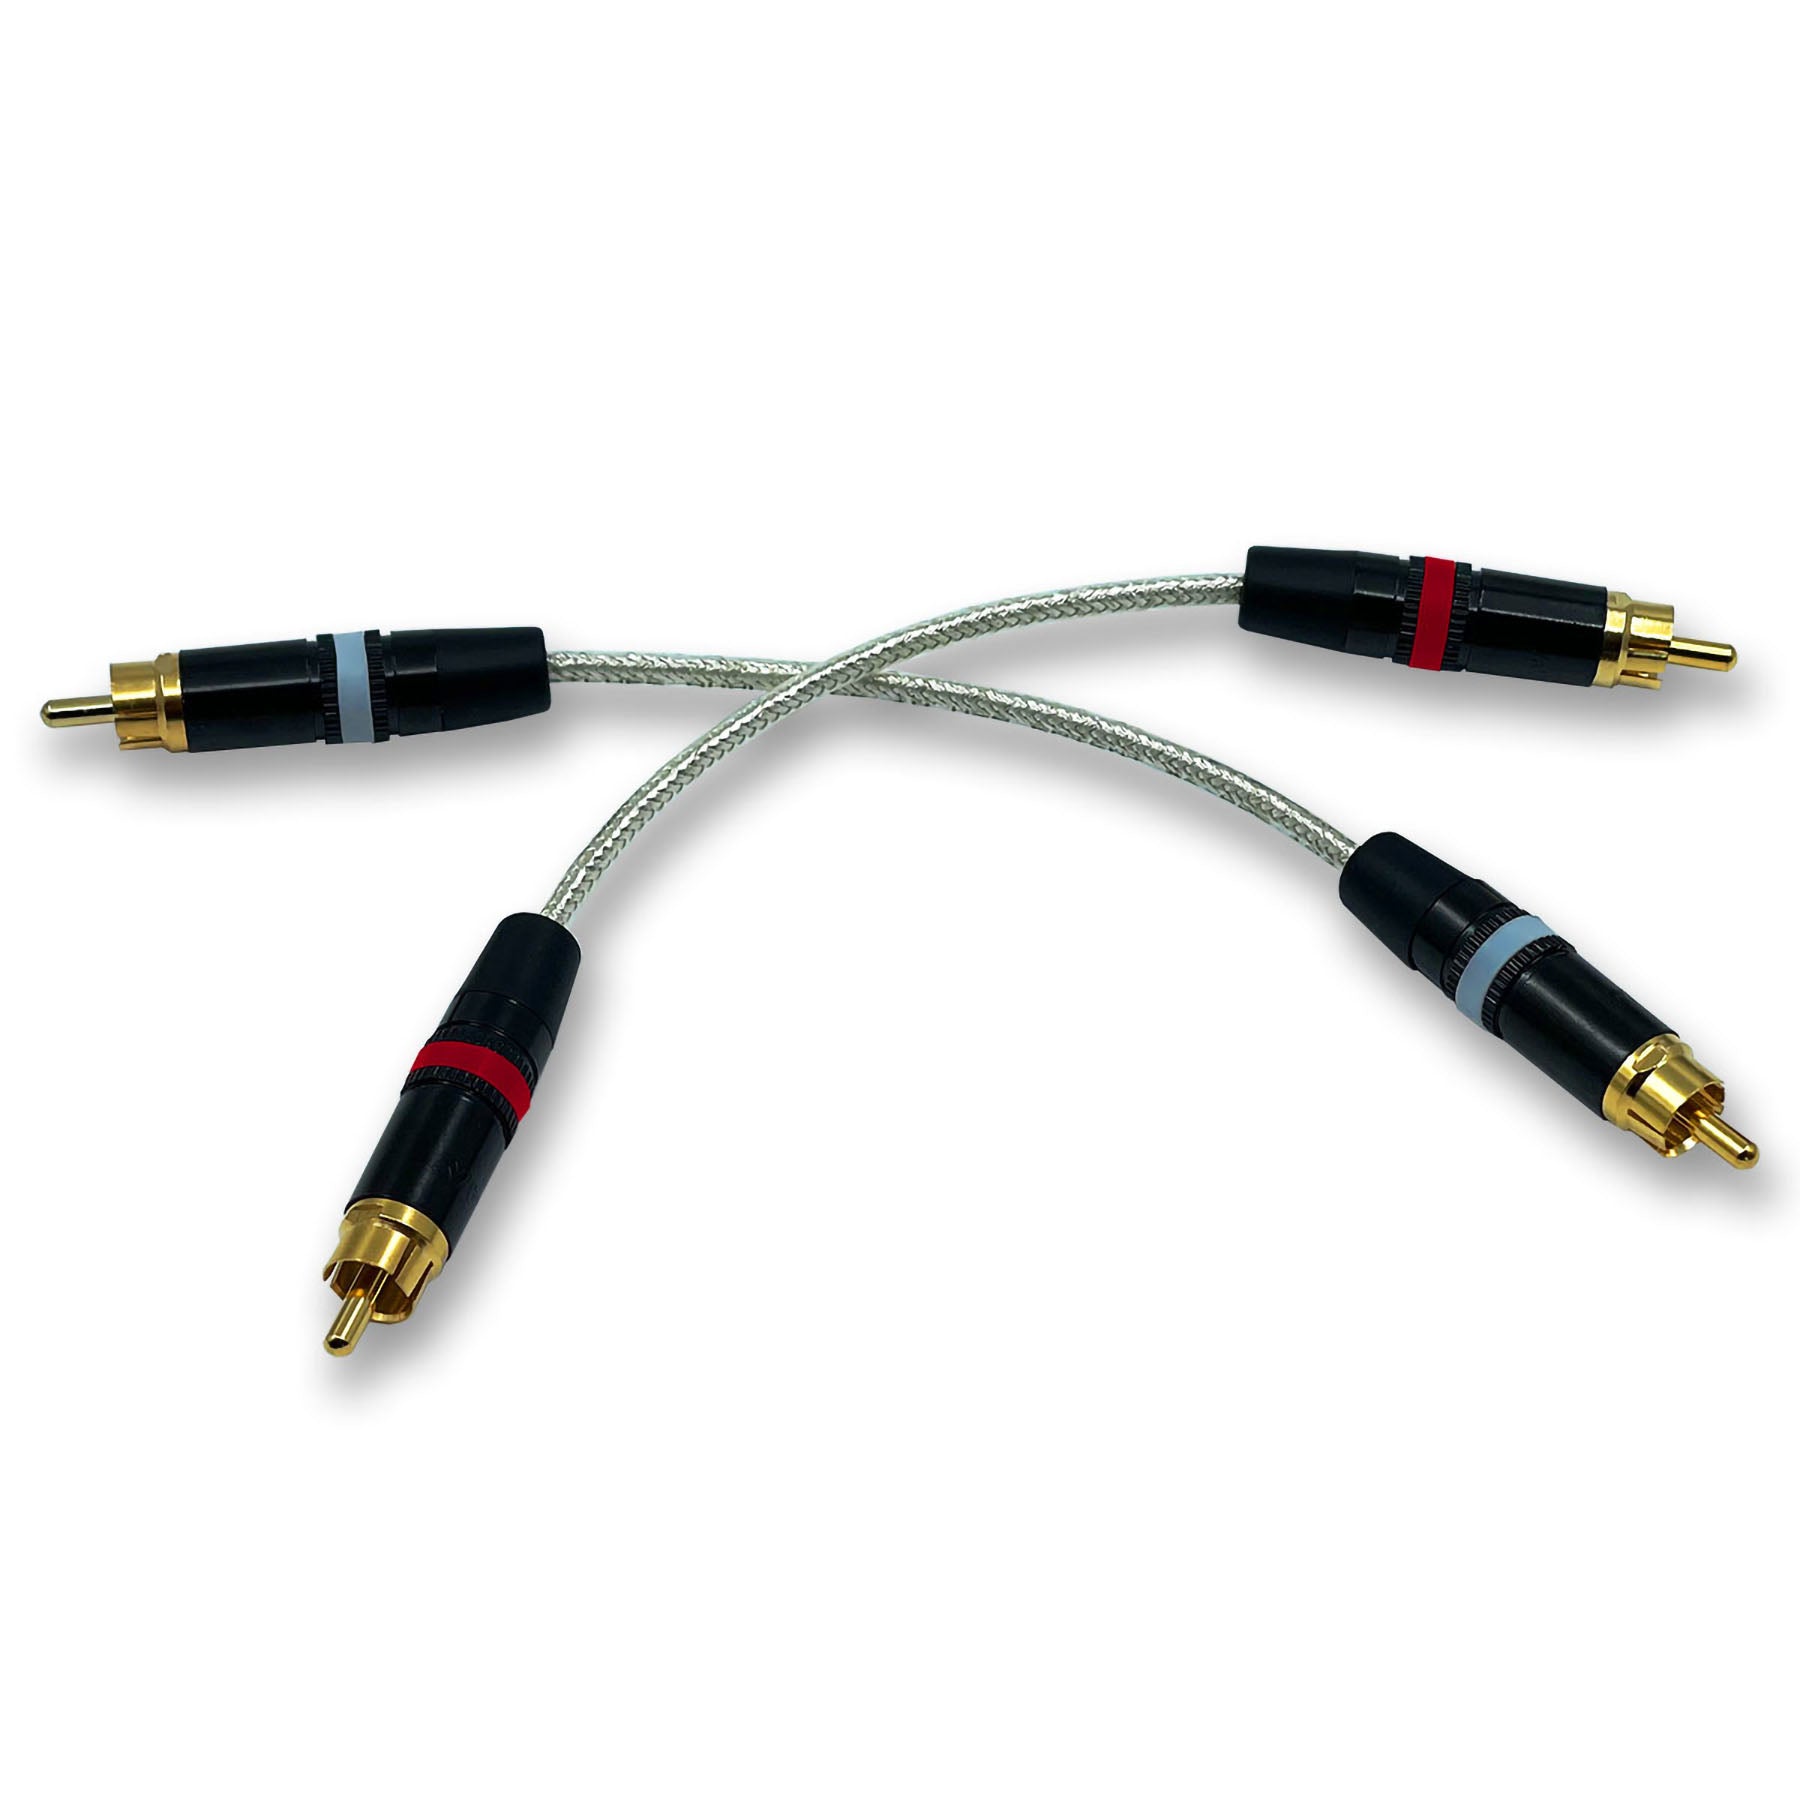 Phono Cables Archives - Analysis Plus